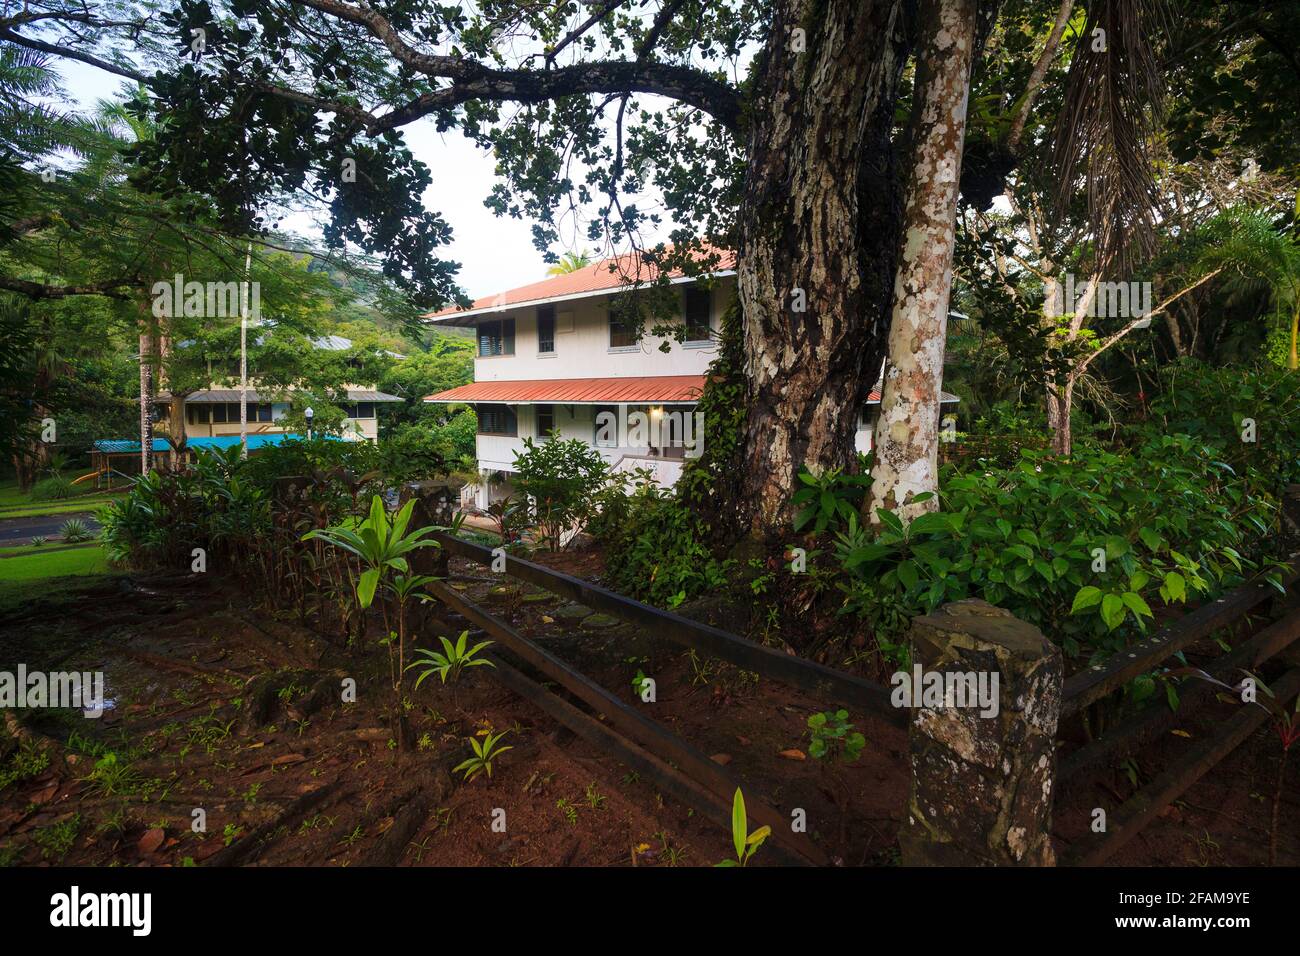 House and garden in the town of Gamboa, Colon province, Republic of Panama, Central America. Stock Photo